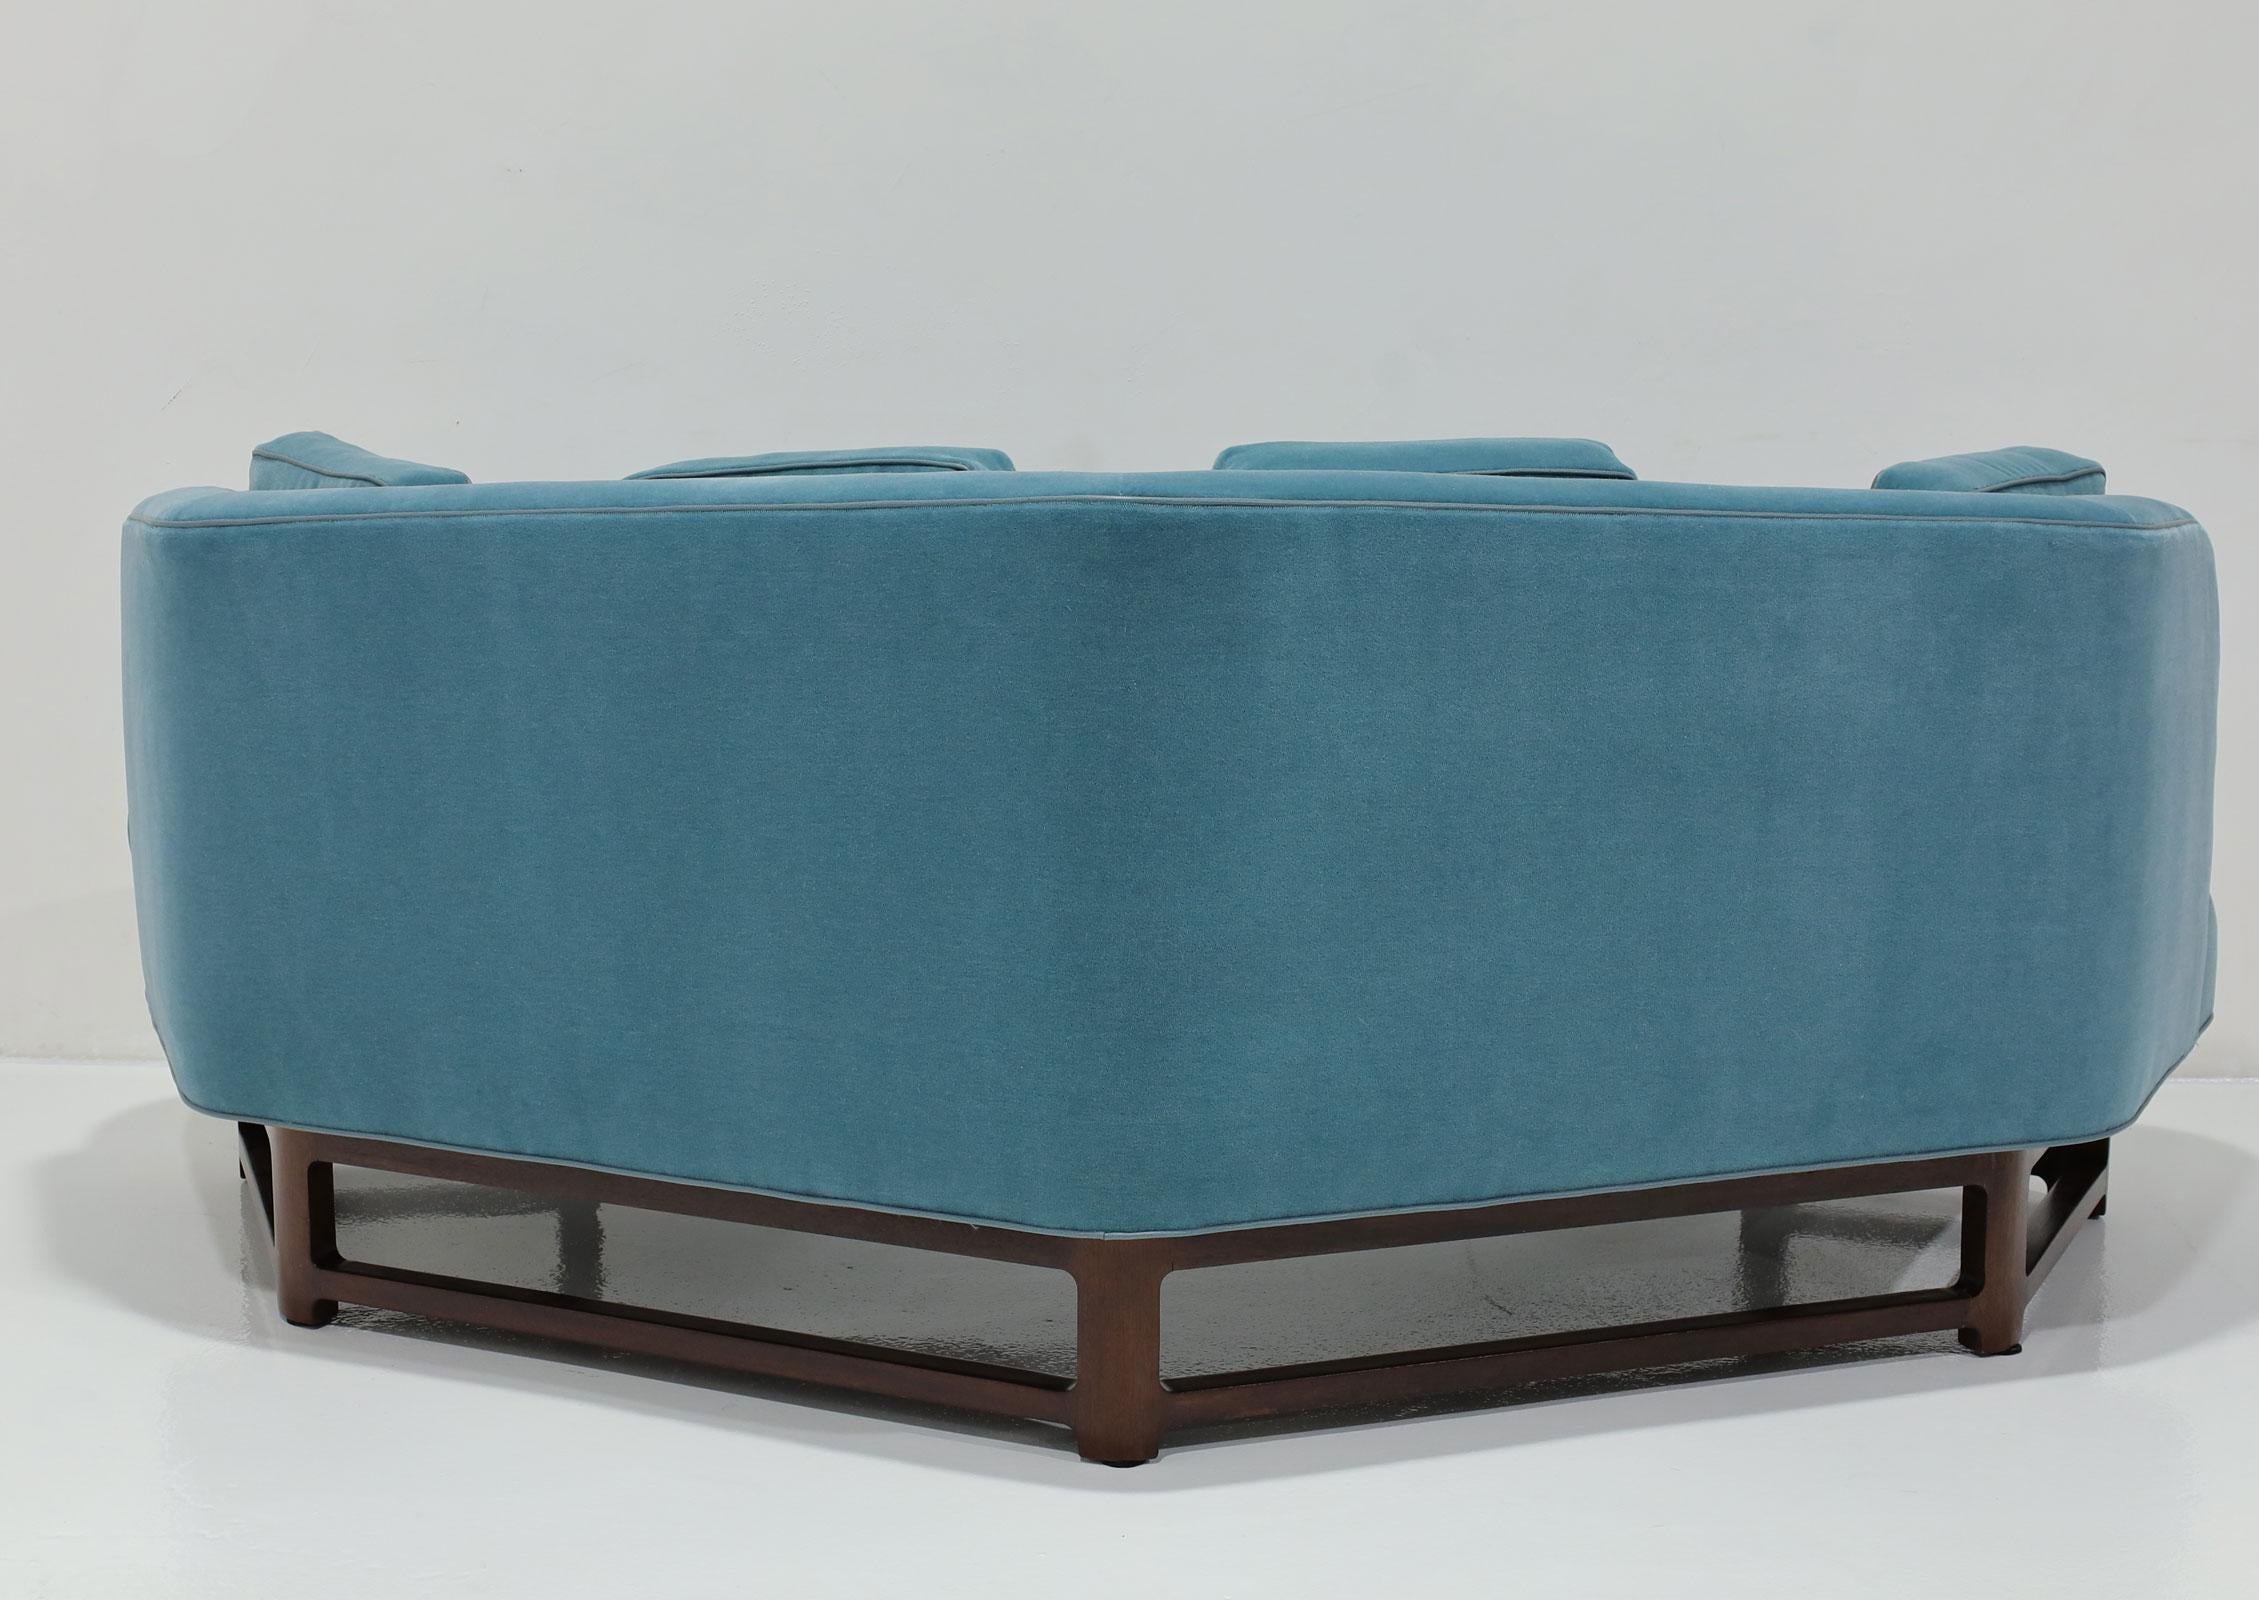 Edward Wormley for Dunbar Janus Collection Angle Sofa in Blue Mohair In Good Condition For Sale In Dallas, TX